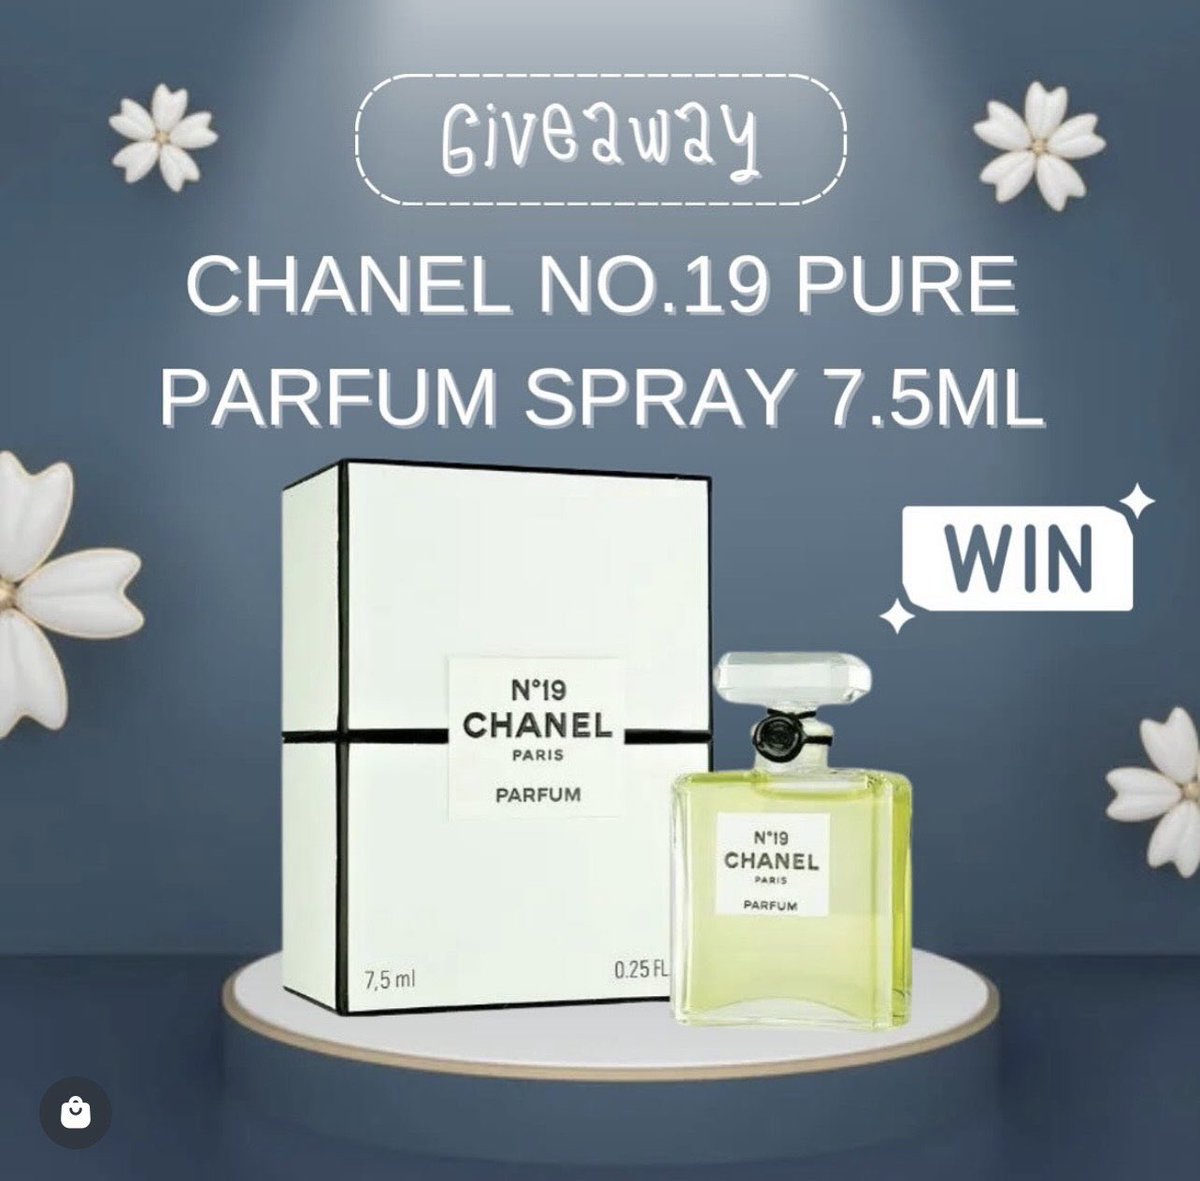 🎉Giveaway Time🎉 How would you like to win yourself a Chanel No.19 Pure Parfum Spray! 1️⃣ Like & share this post  2️⃣ Tag your bestie 3️⃣ Make sure you are following @thebeautystorecom Competition ends Thursday 9th May 6pm! Good Luck!  thebeautystore.com #competition